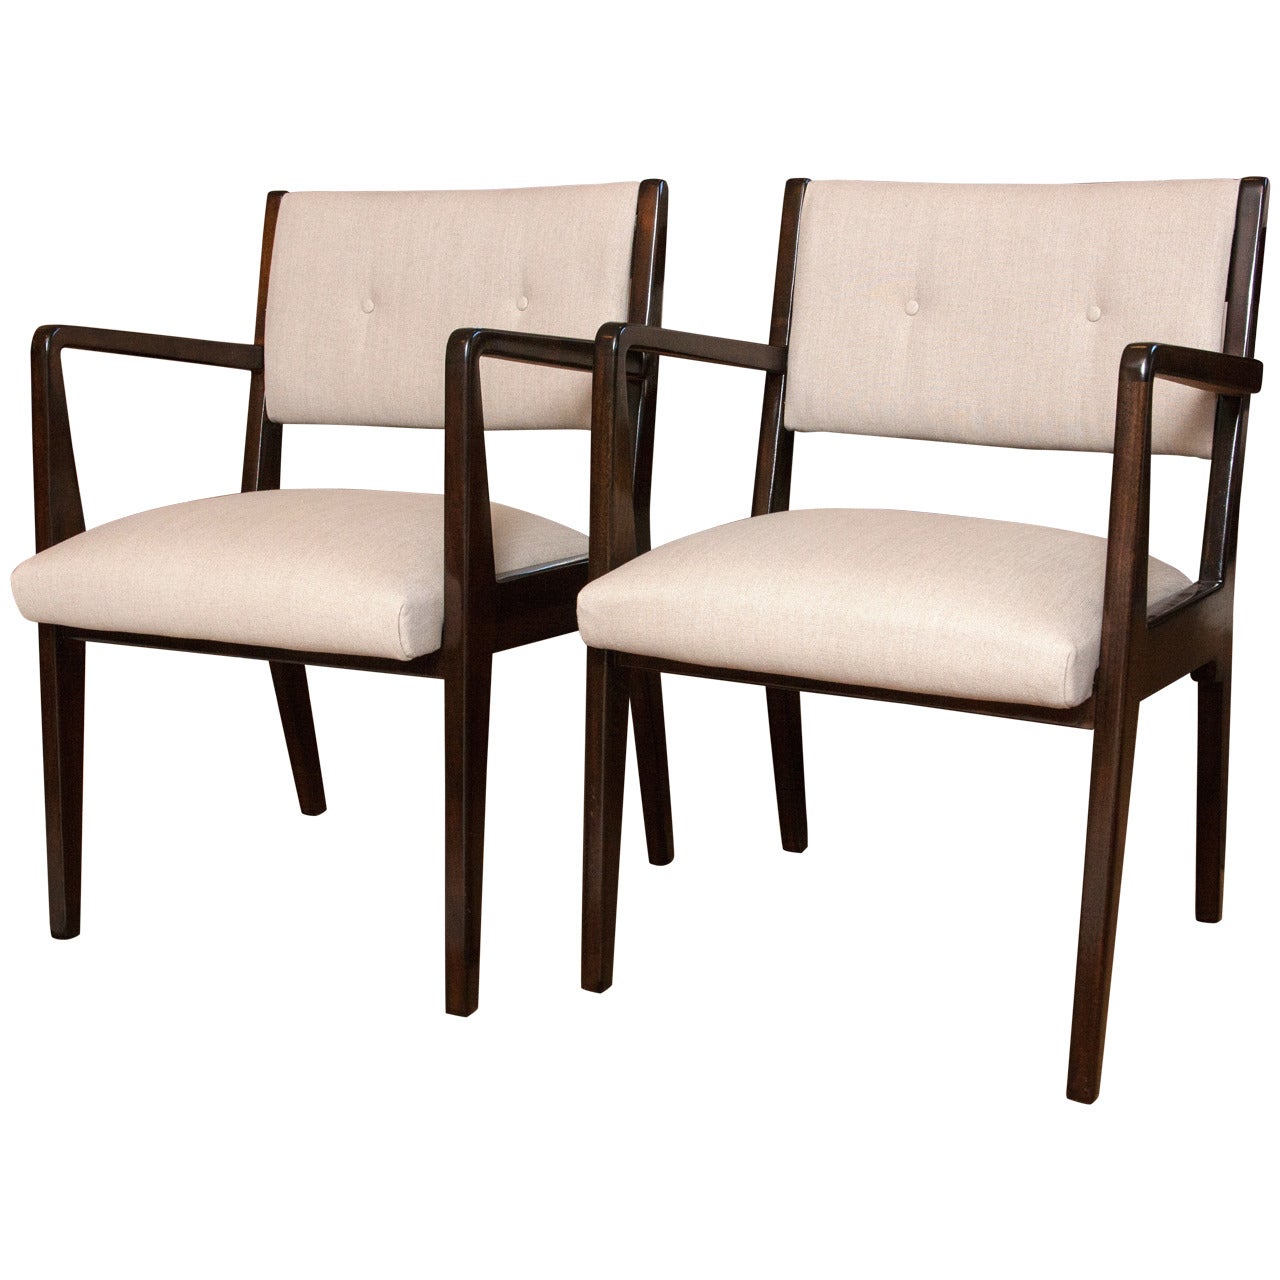 Pair of Jens Risom Mid-Century Chairs